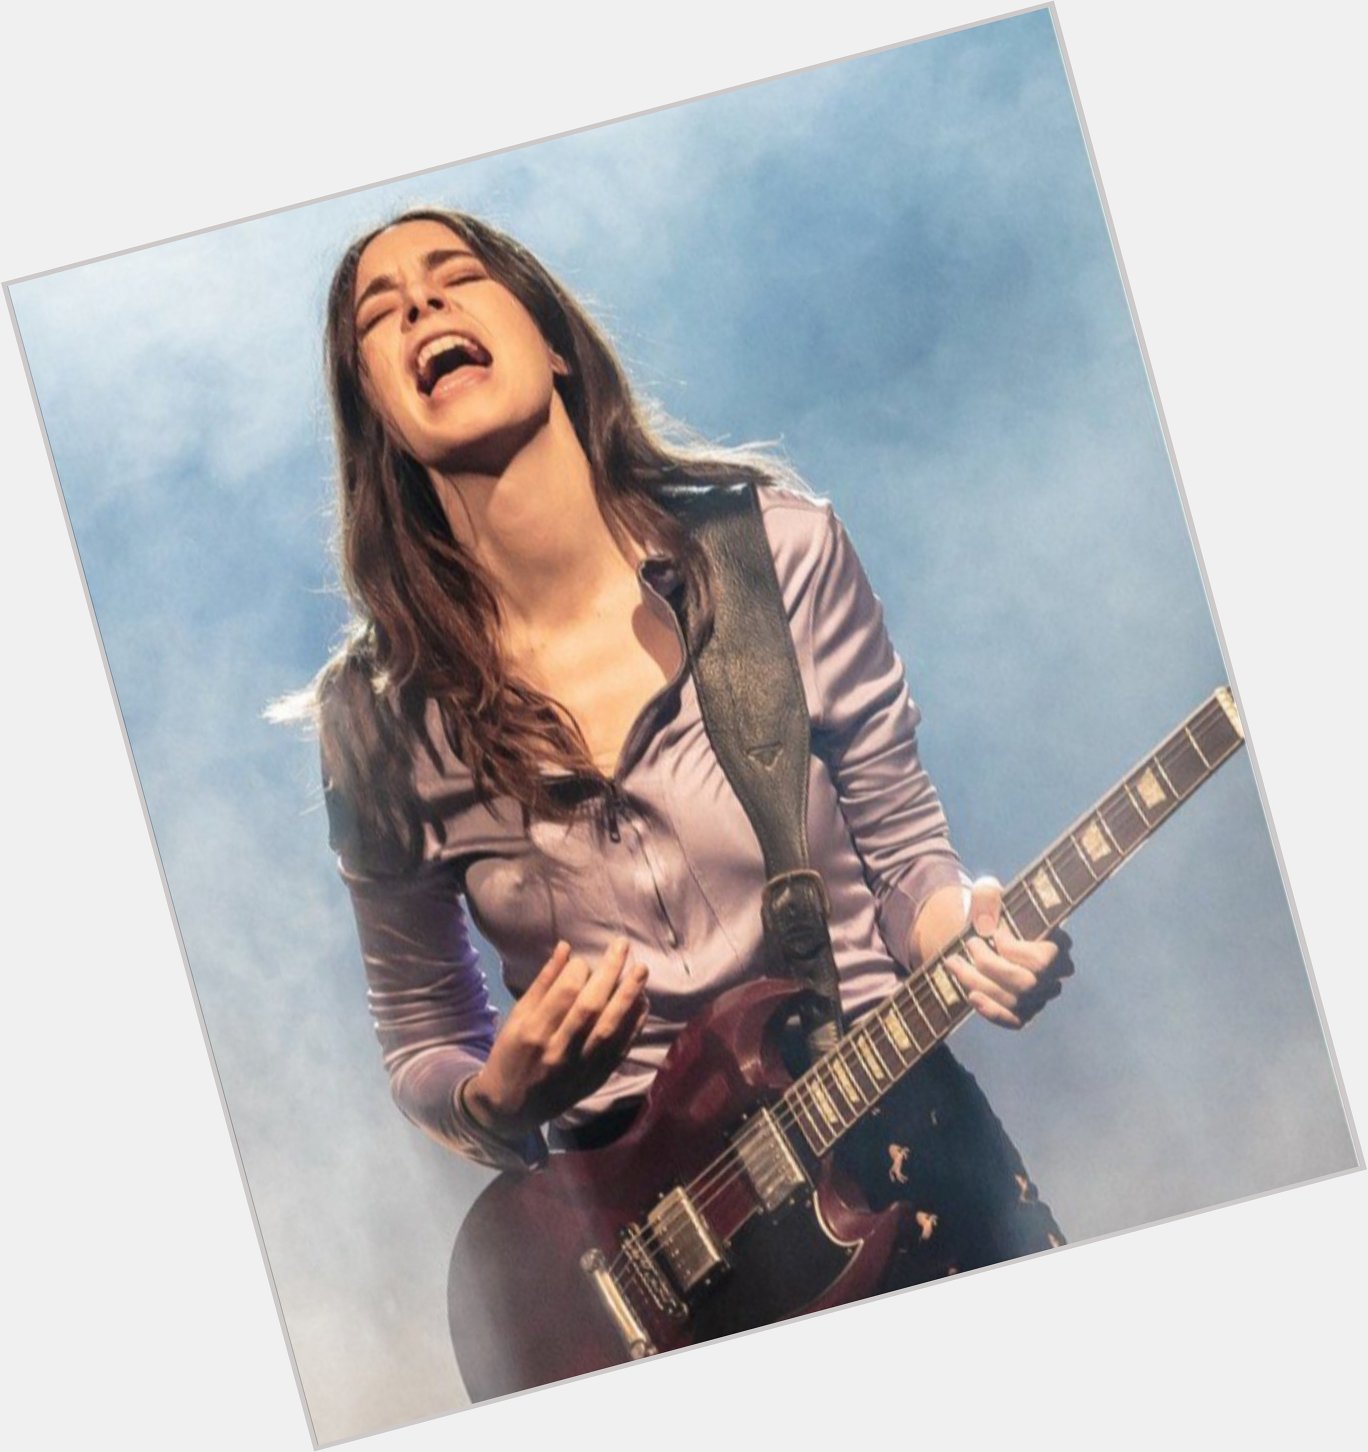 Happy birthday to the ultimate love of my life and fav shredding queen, Danielle Haim    